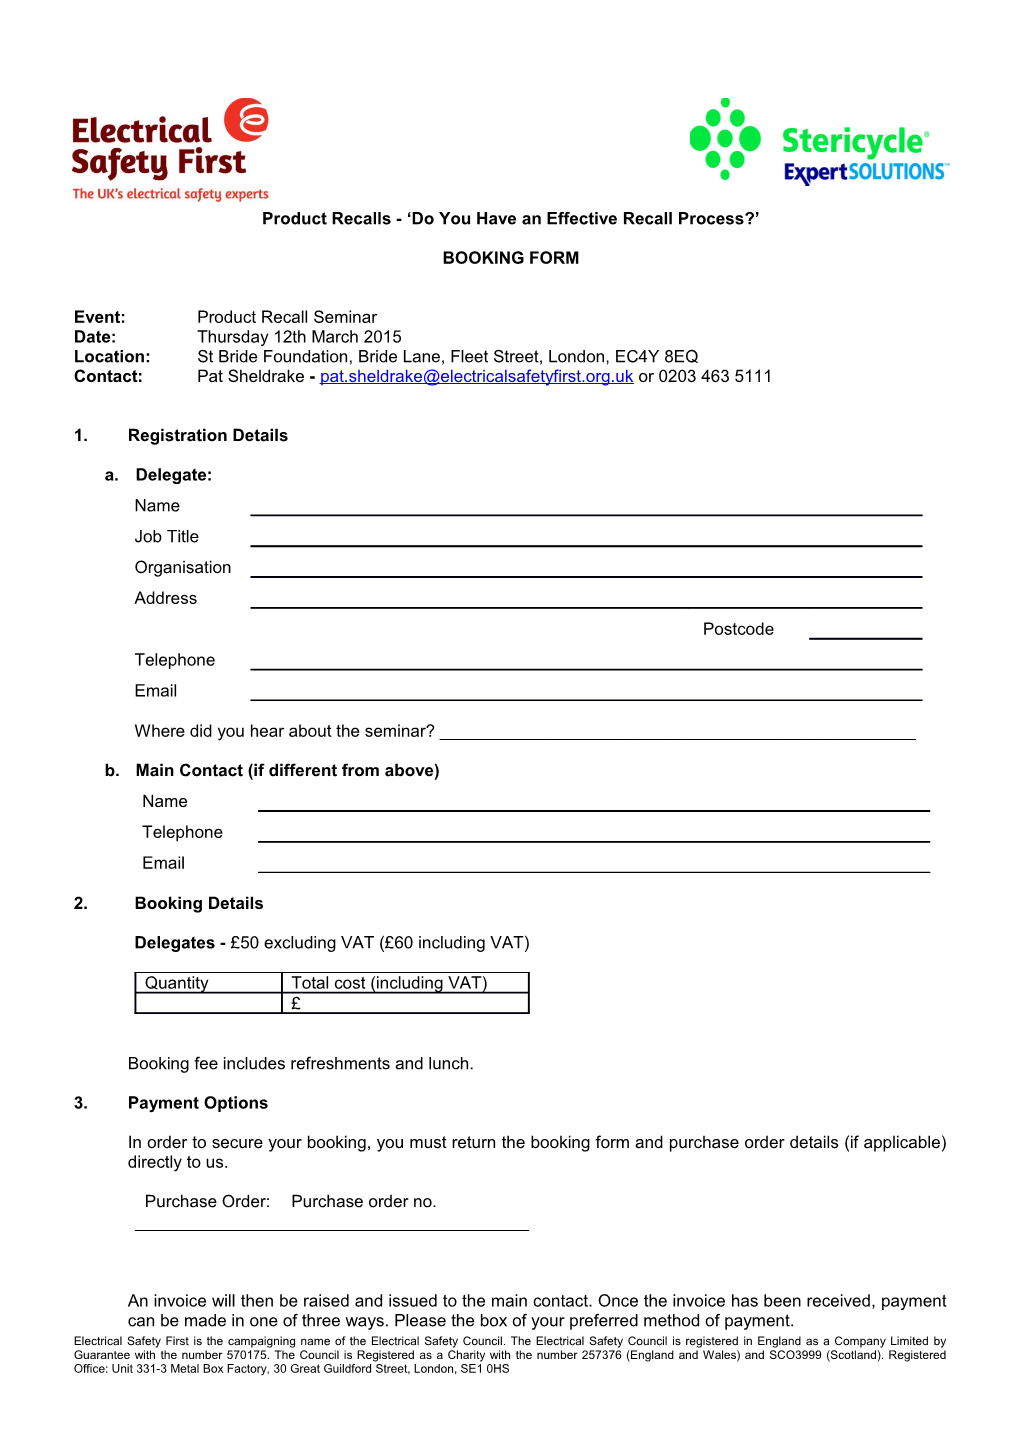 Booking Form Template